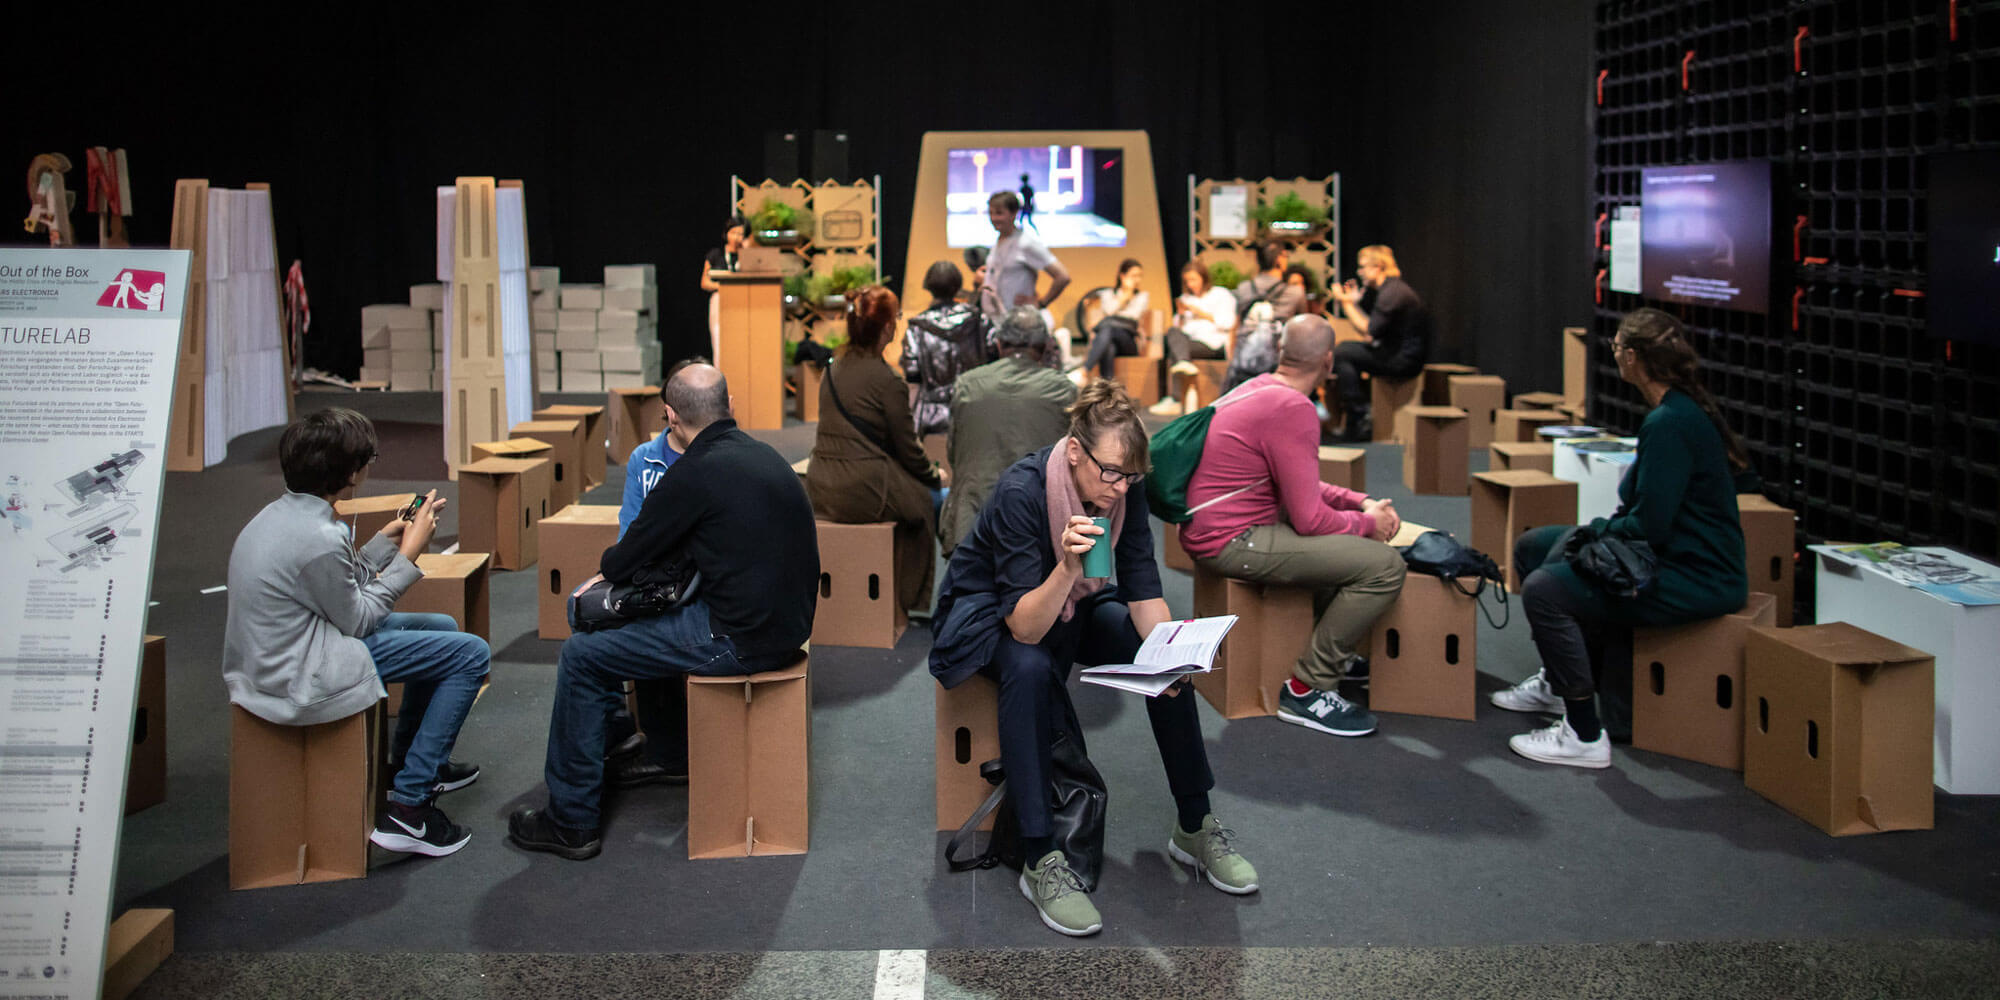 Open Futurelab 2019 at POSTCITY, Linz (AT) presented Ars Electronica Futurelab’s projects and initiatives created in collaboration between industries, education, art, and science.